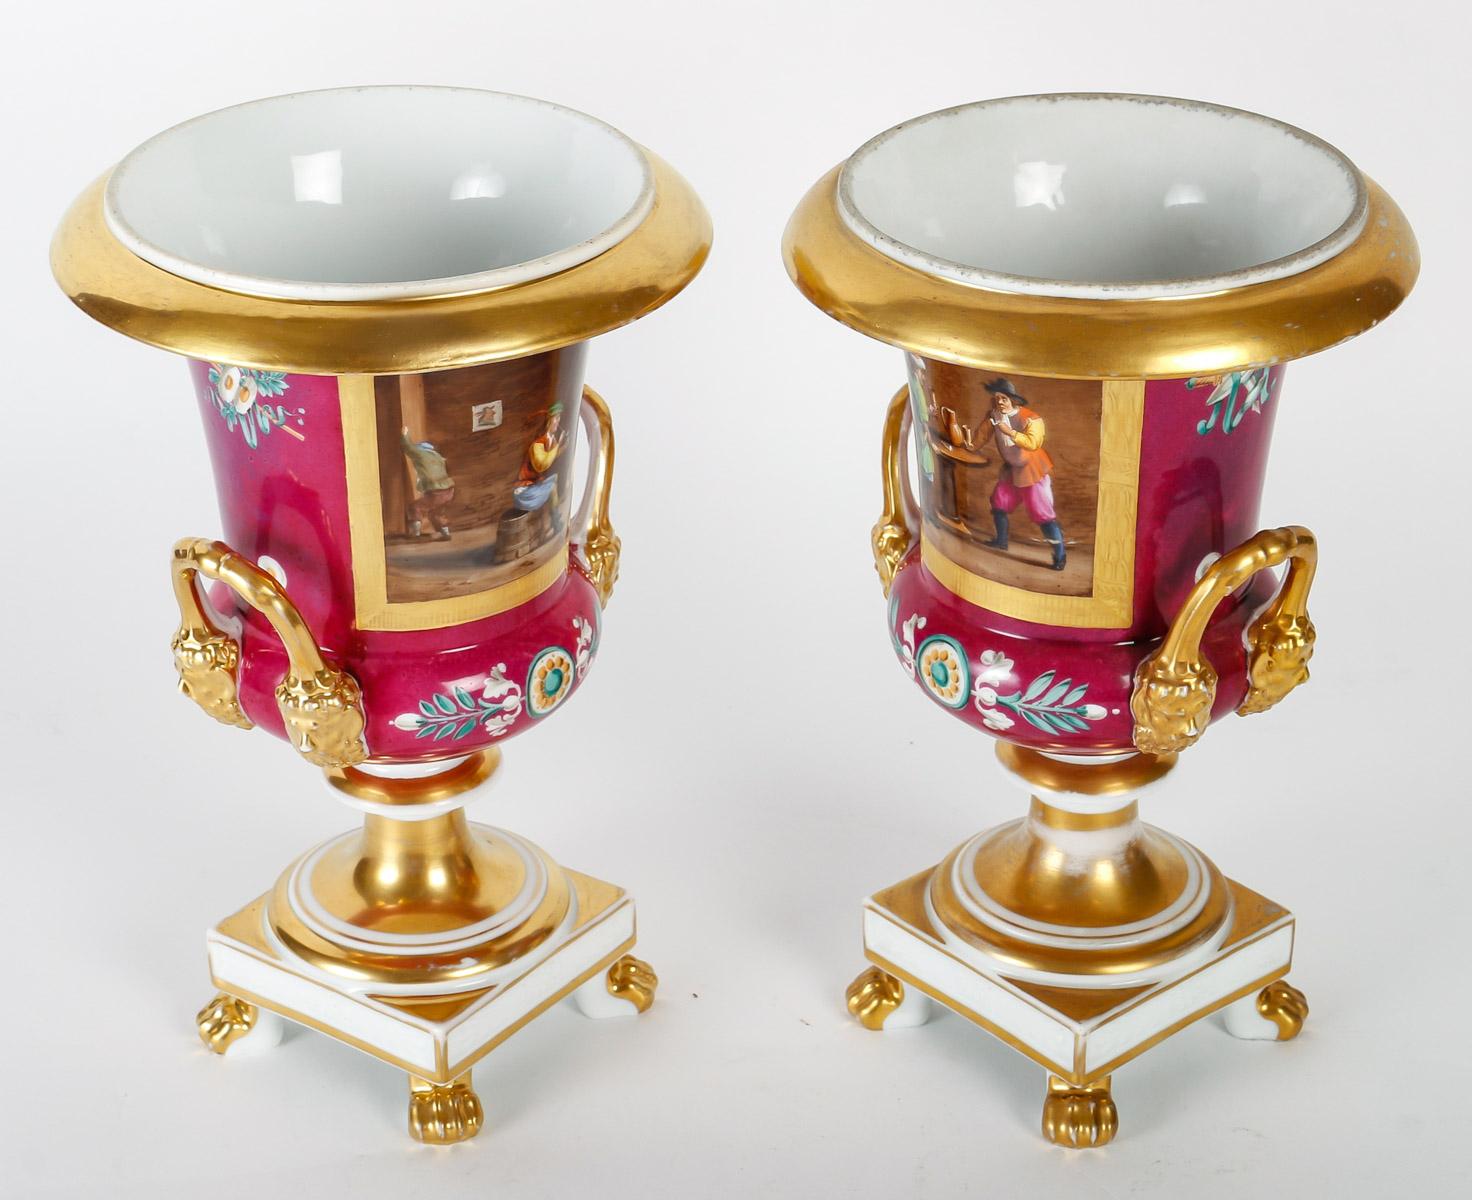 French Pair of Paris Porcelain Medicis Vases from the 19th Century . For Sale